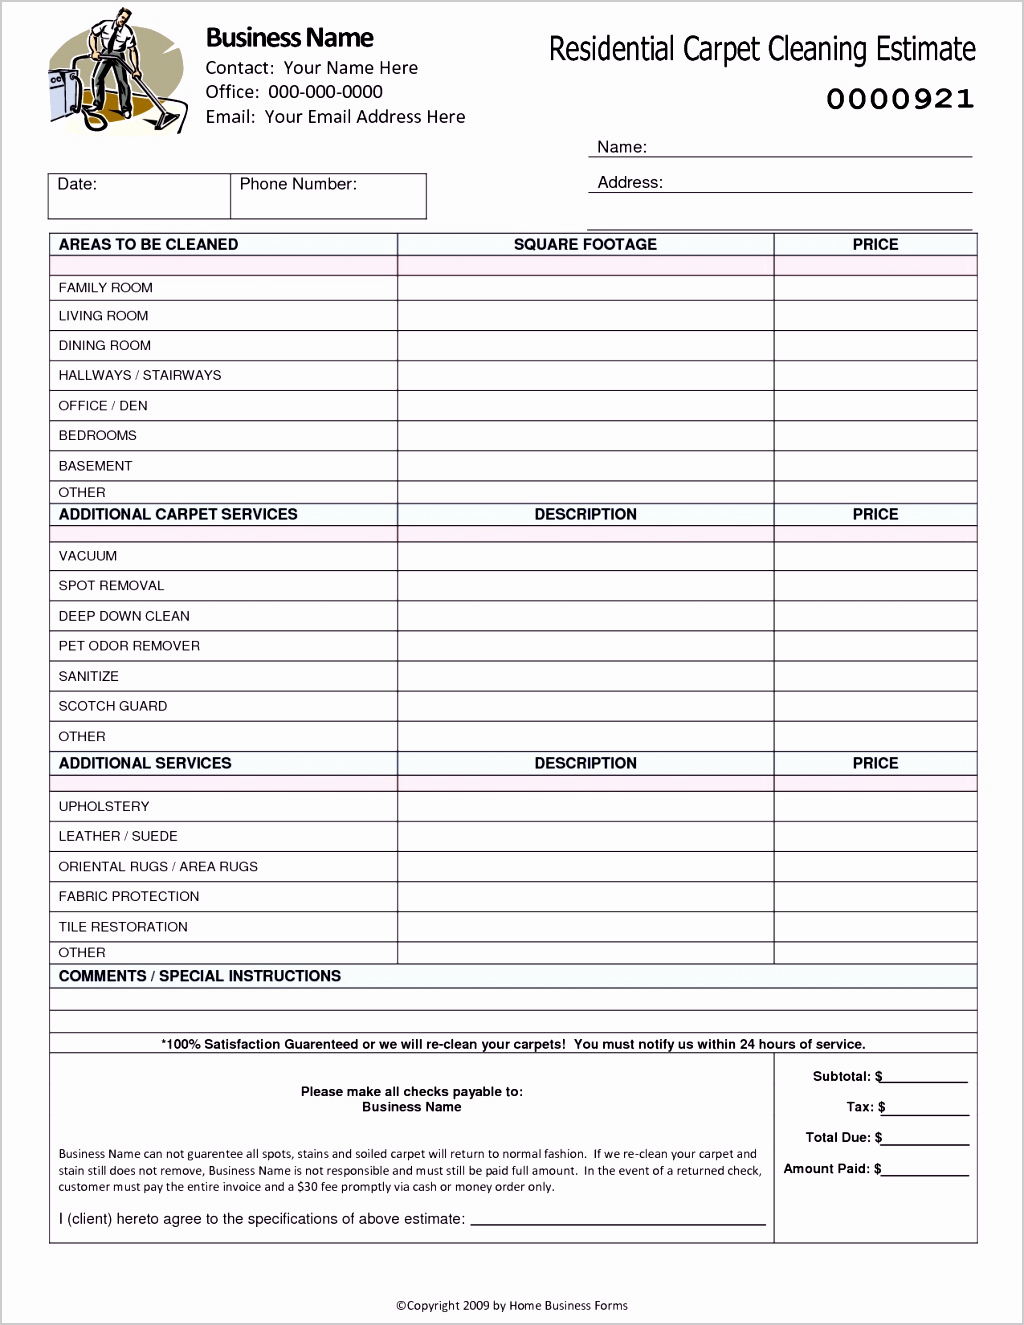 Moving Company Invoice Template Awesome 35 Moving Pany Invoice Example Sampletemplatez